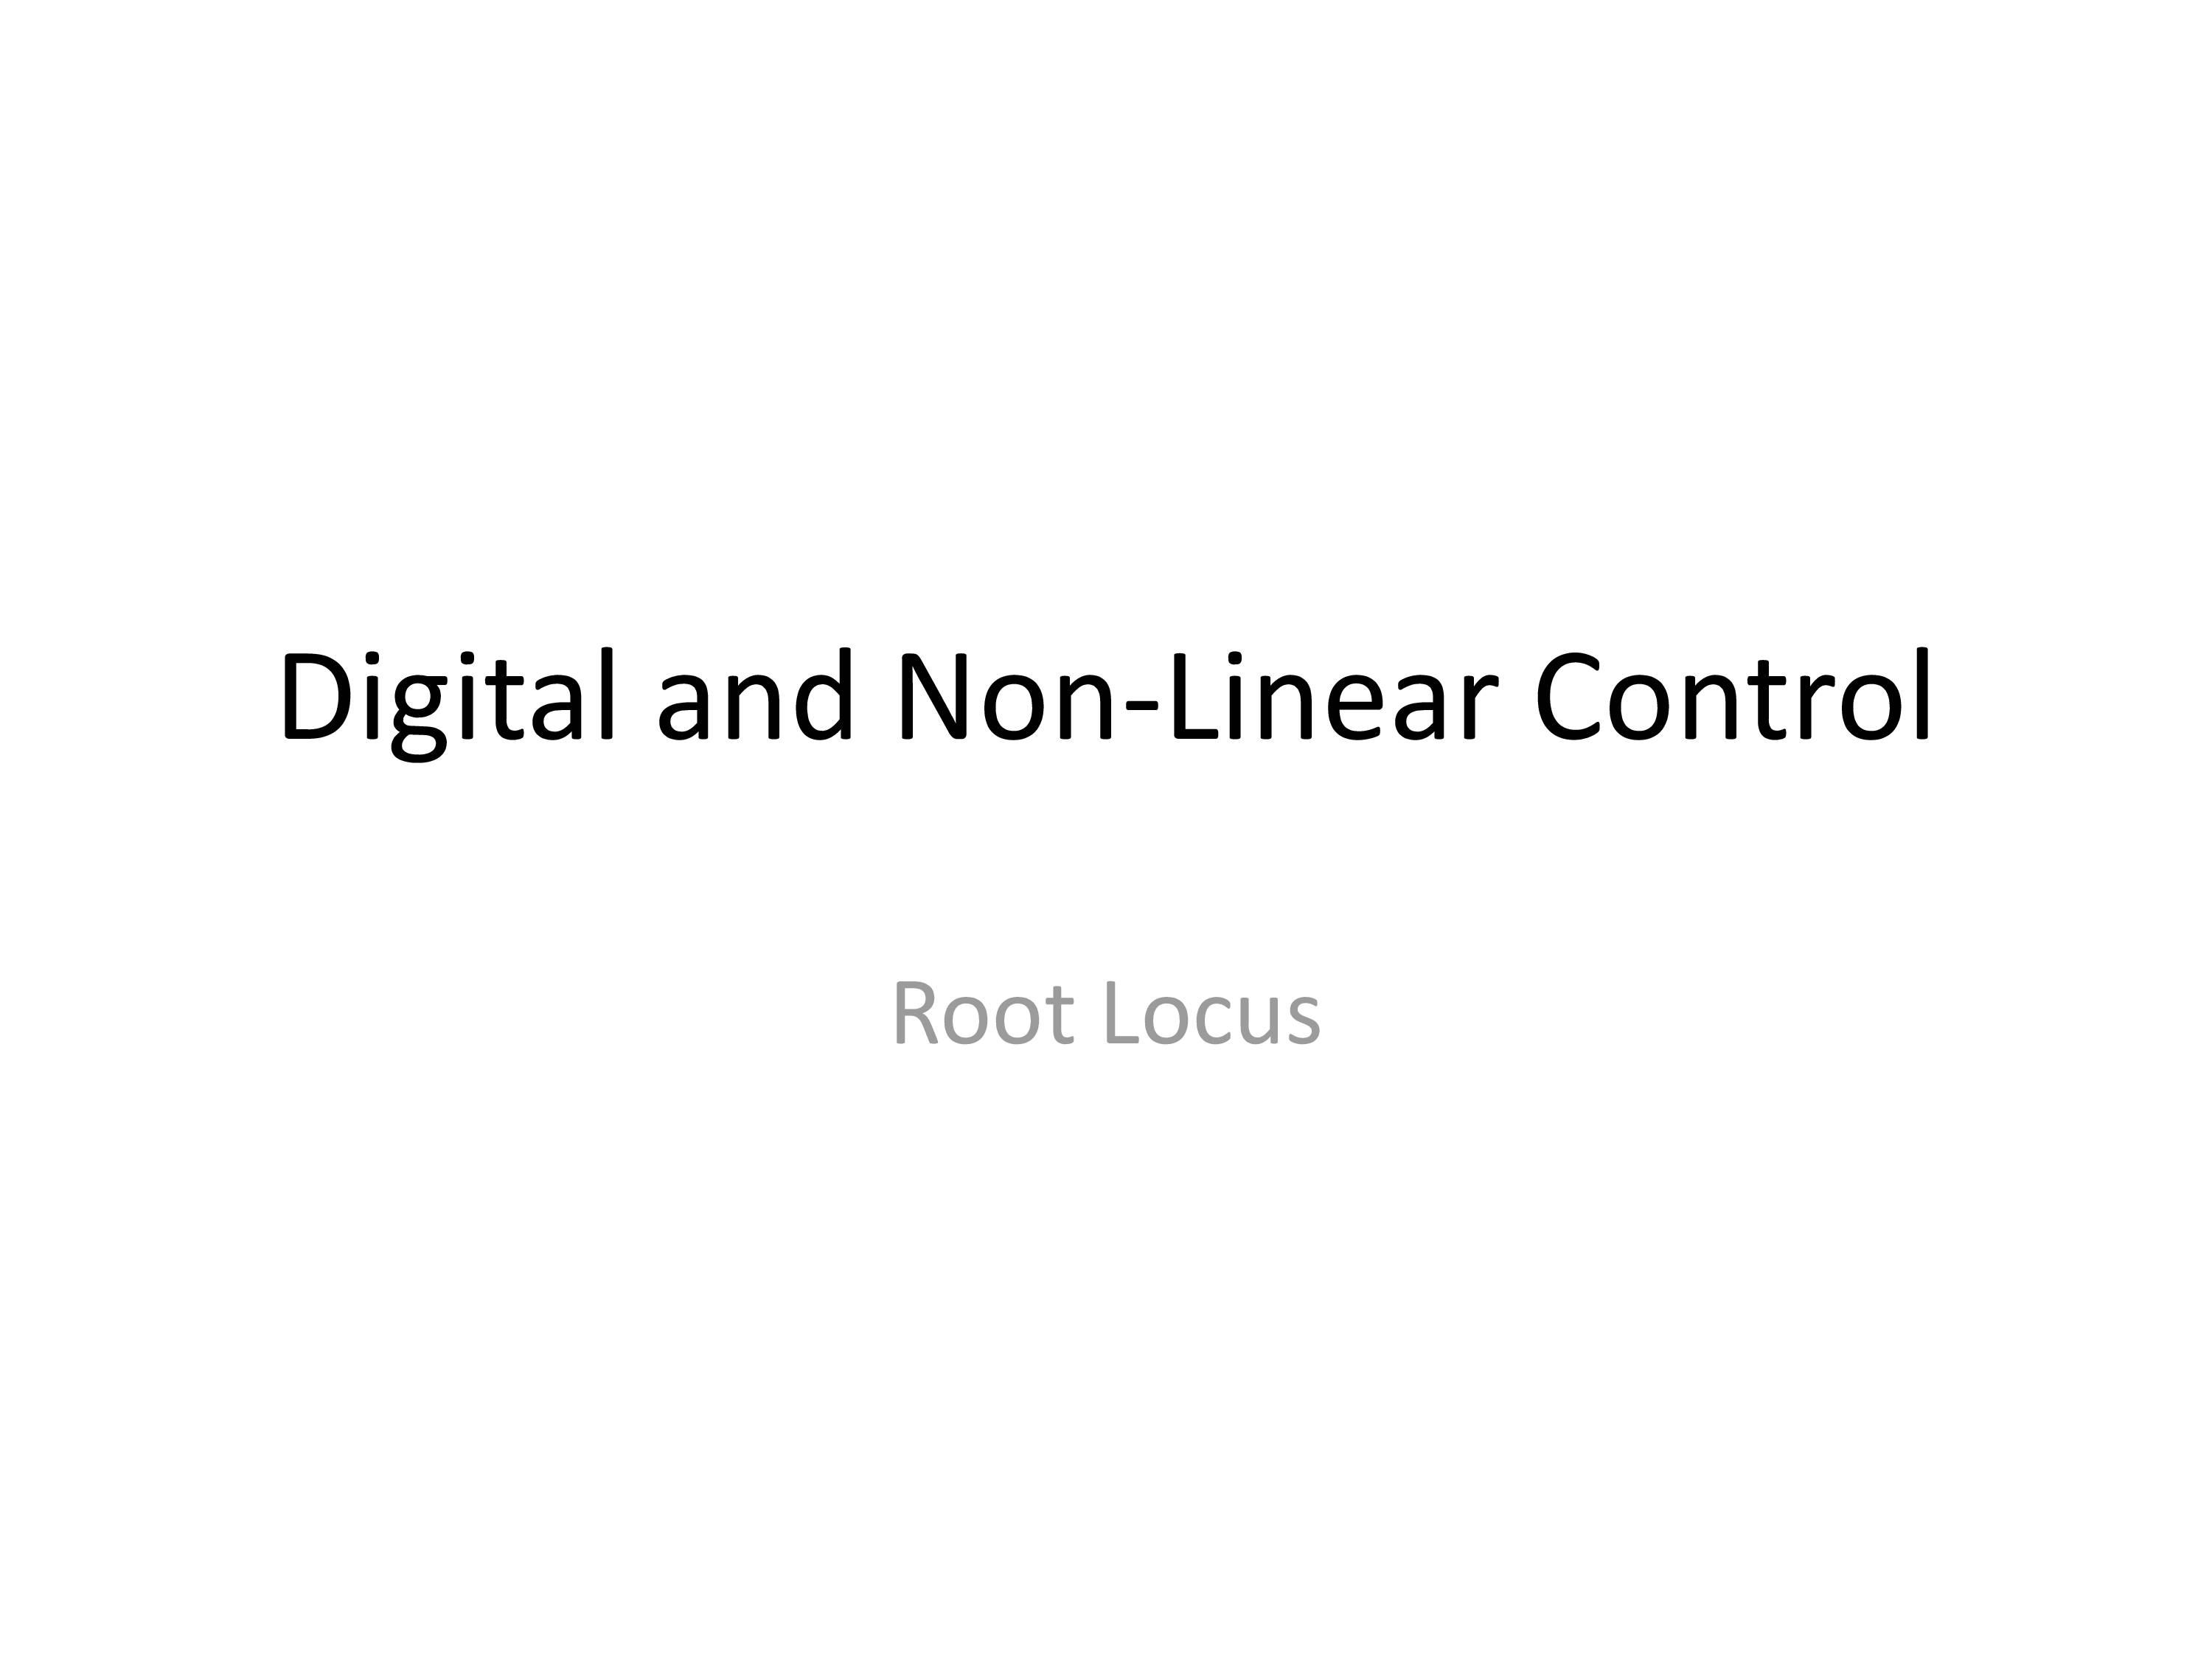 PPT on ROOT LOCUS (CONTROL ENGINEERING )